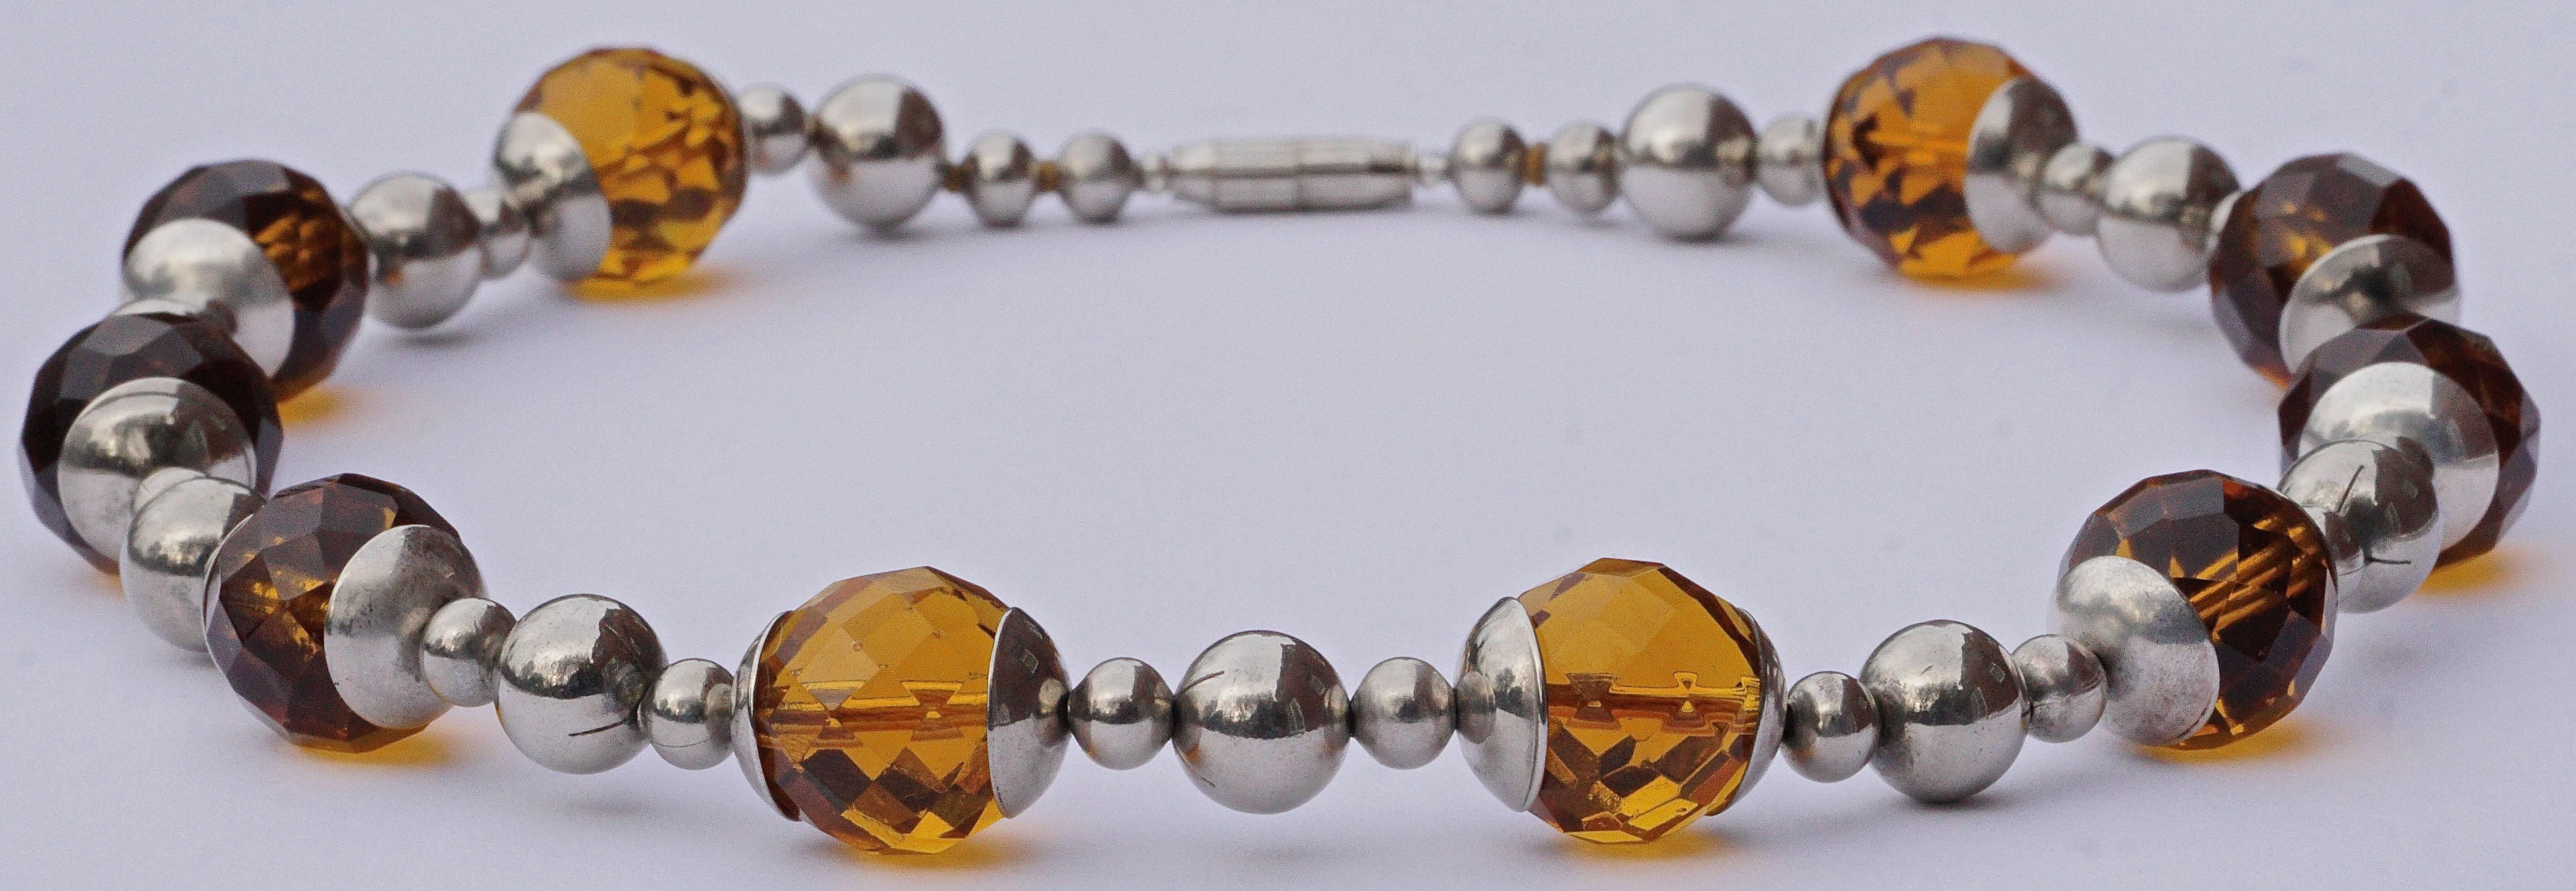 Art Deco chrome necklace featuring faceted amber glass beads, length 46.7cm / 18.4 inches. The glass beads are diameter 1.5cm / .59 inch. This necklace has been professionally restrung, and the vintage barrel clasp is a replacement.

The contrasting